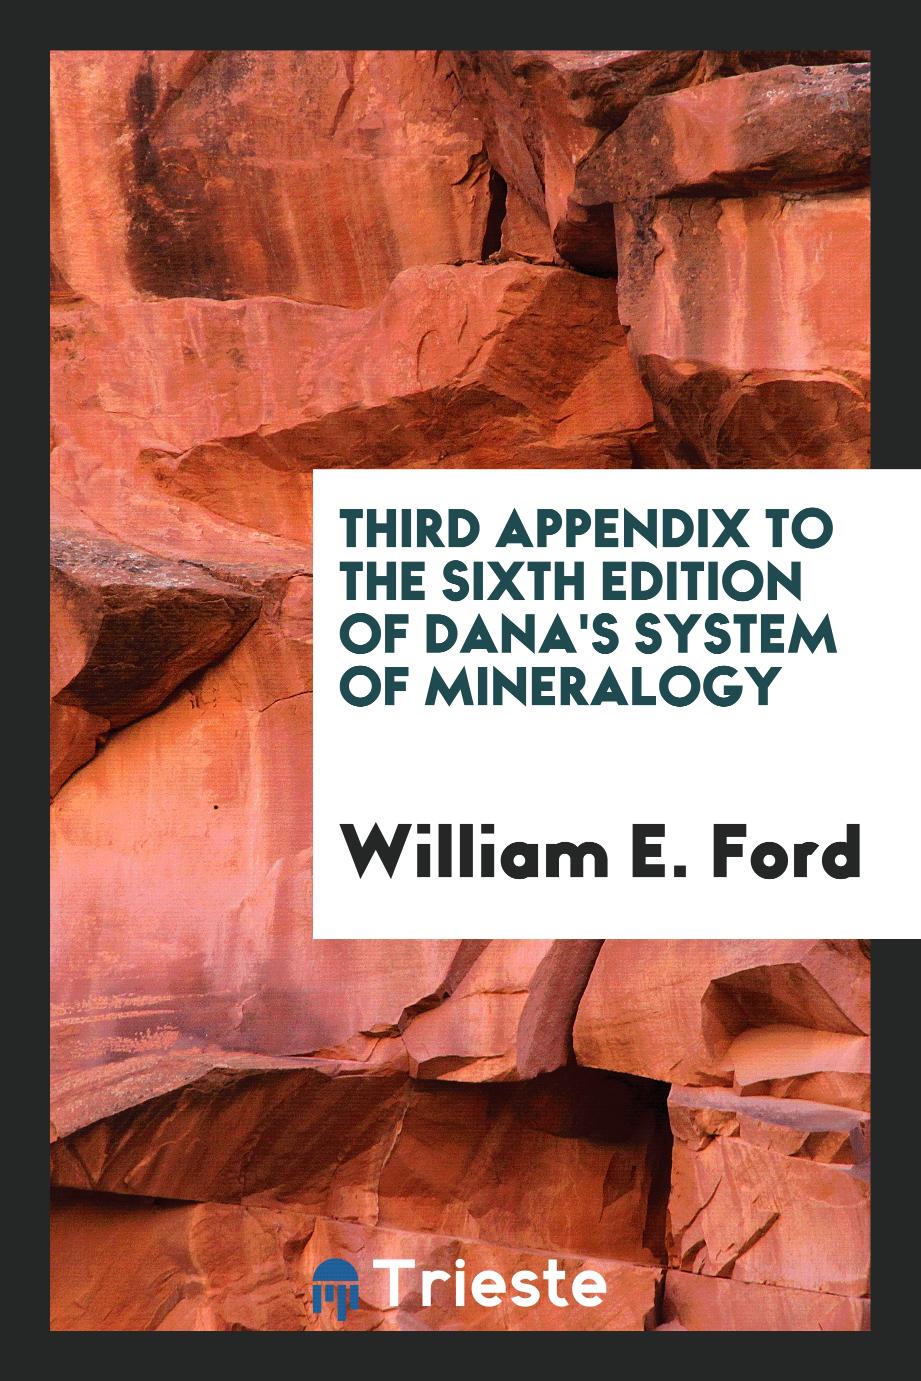 Third Appendix to the Sixth Edition of Dana's System of Mineralogy